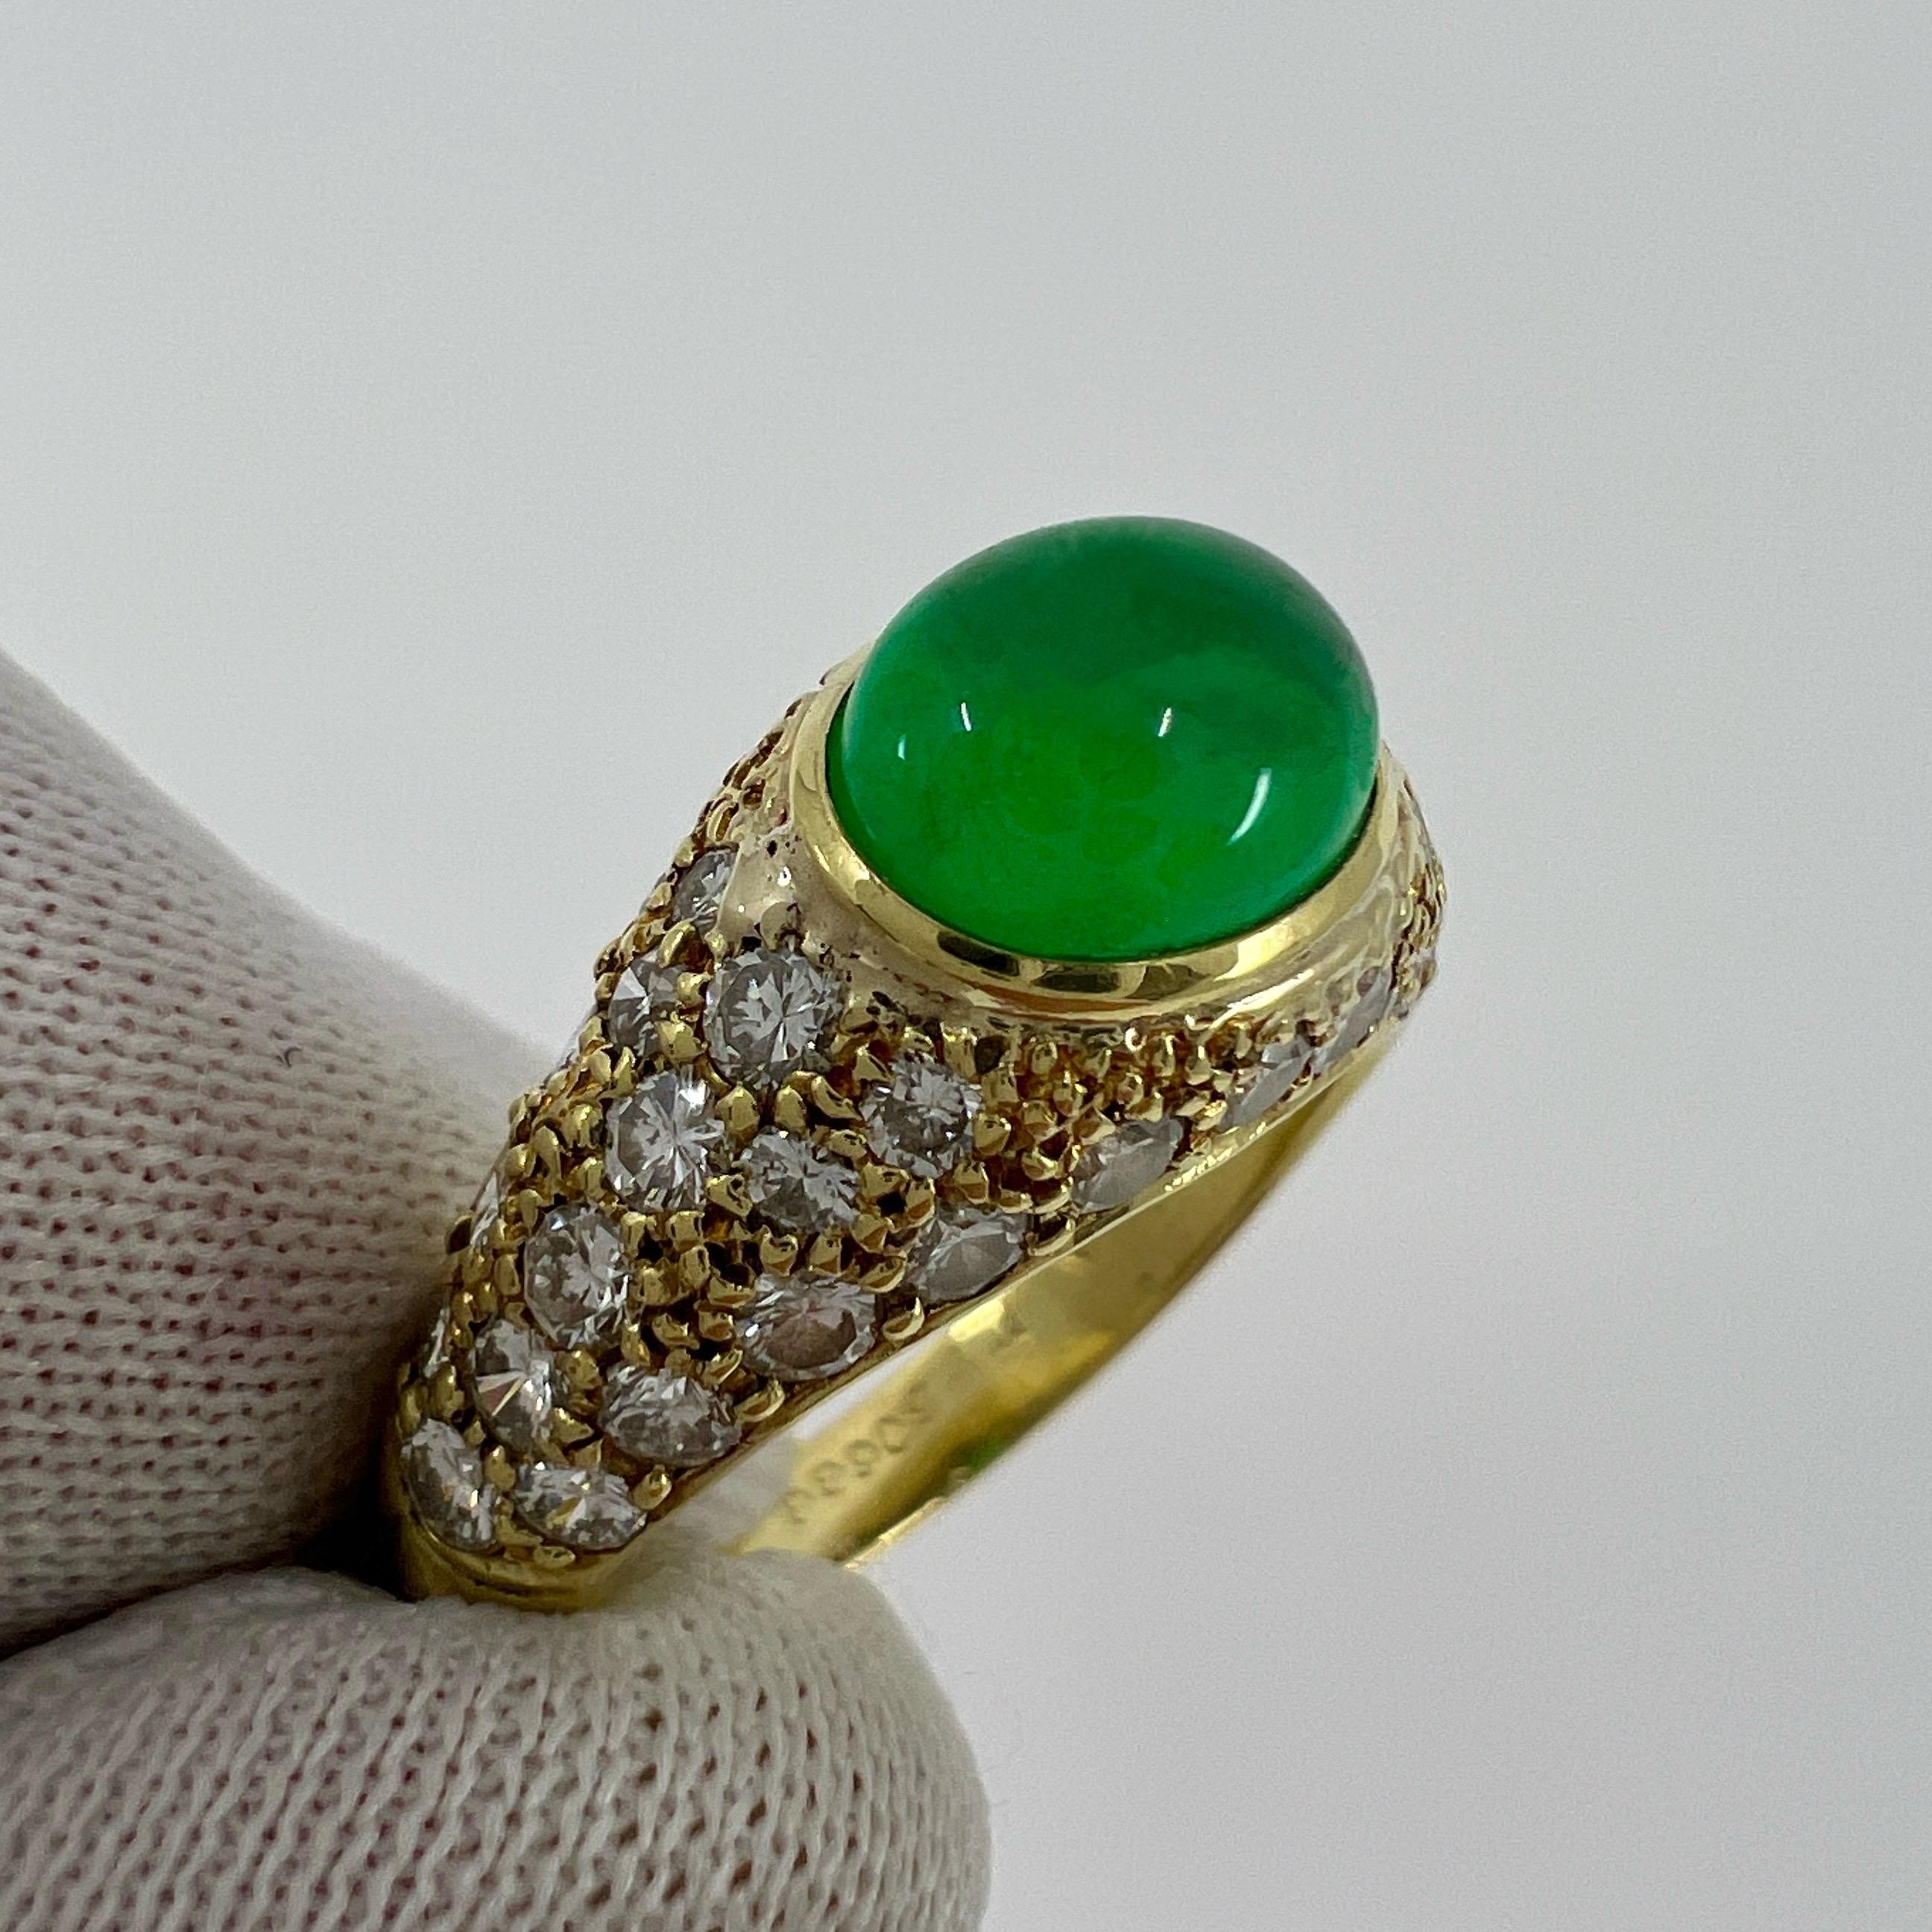 Rare Vintage Van Cleef & Arpels 2 Carat Emerald And Diamond Cocktail Dome Ring For Sale 4